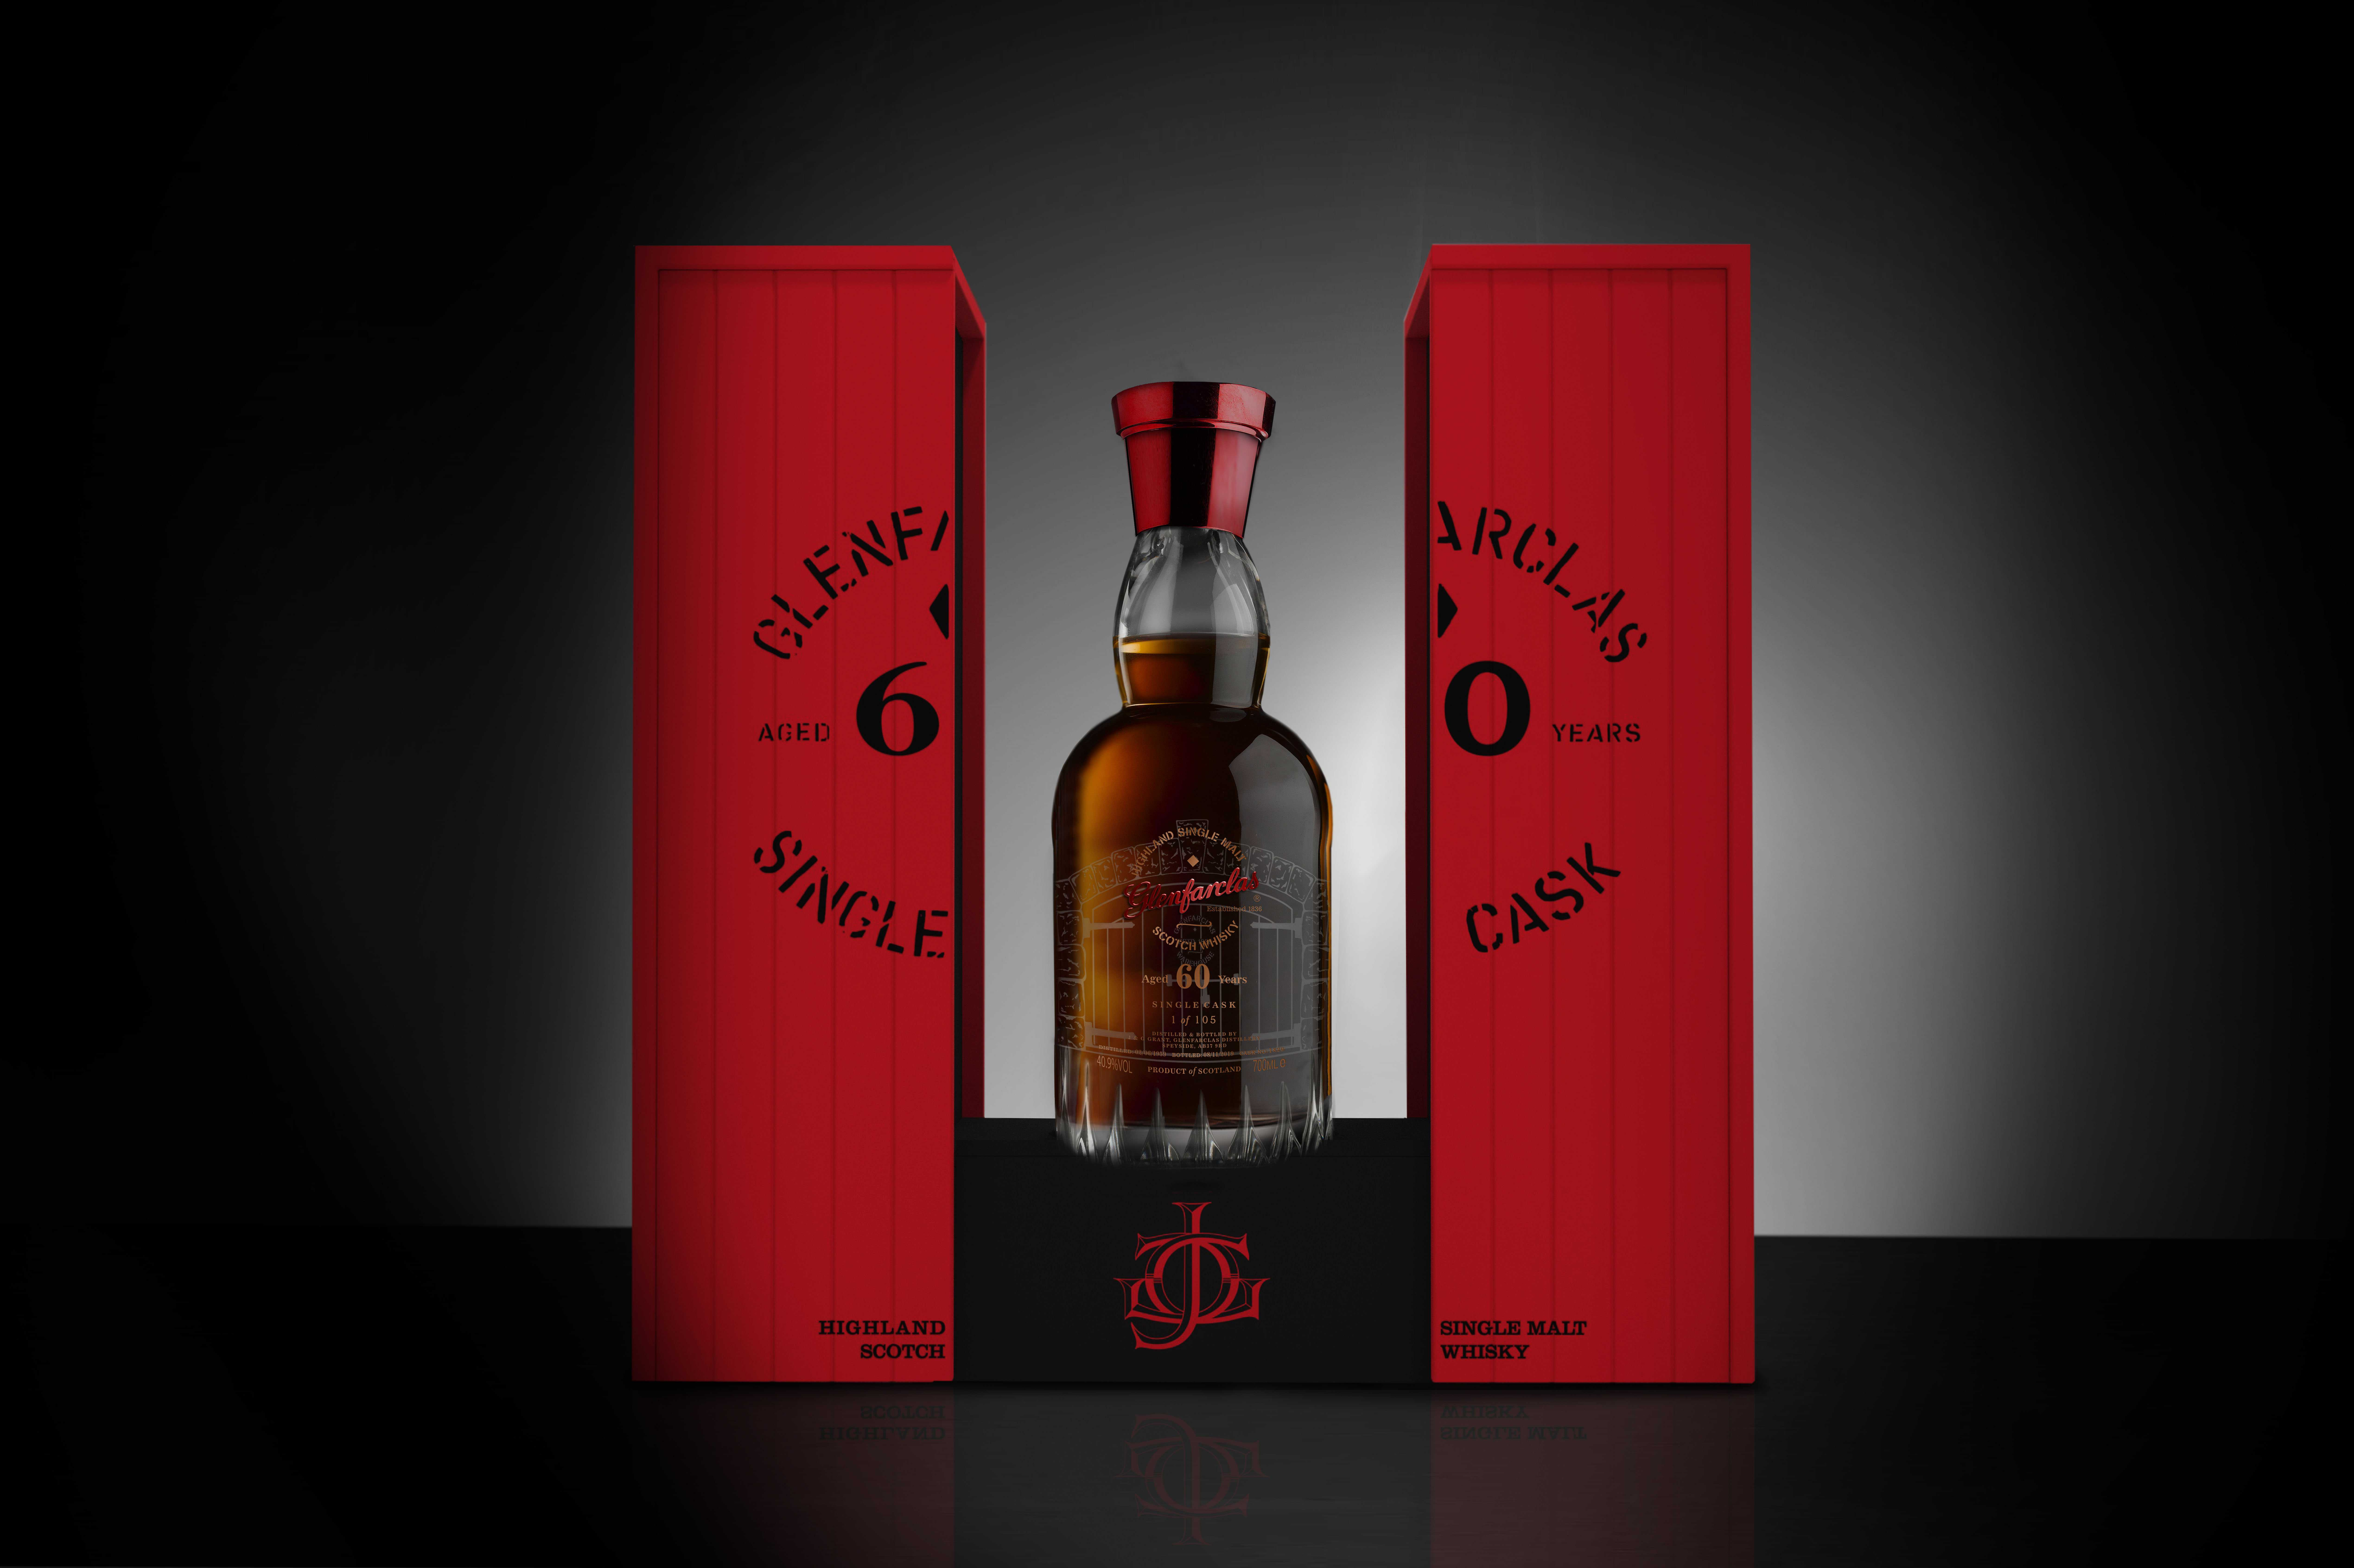 Speyside distillery Glenfarclas has released a limited edition 60-year-old Scotch whisky in the UK, priced at £19,500